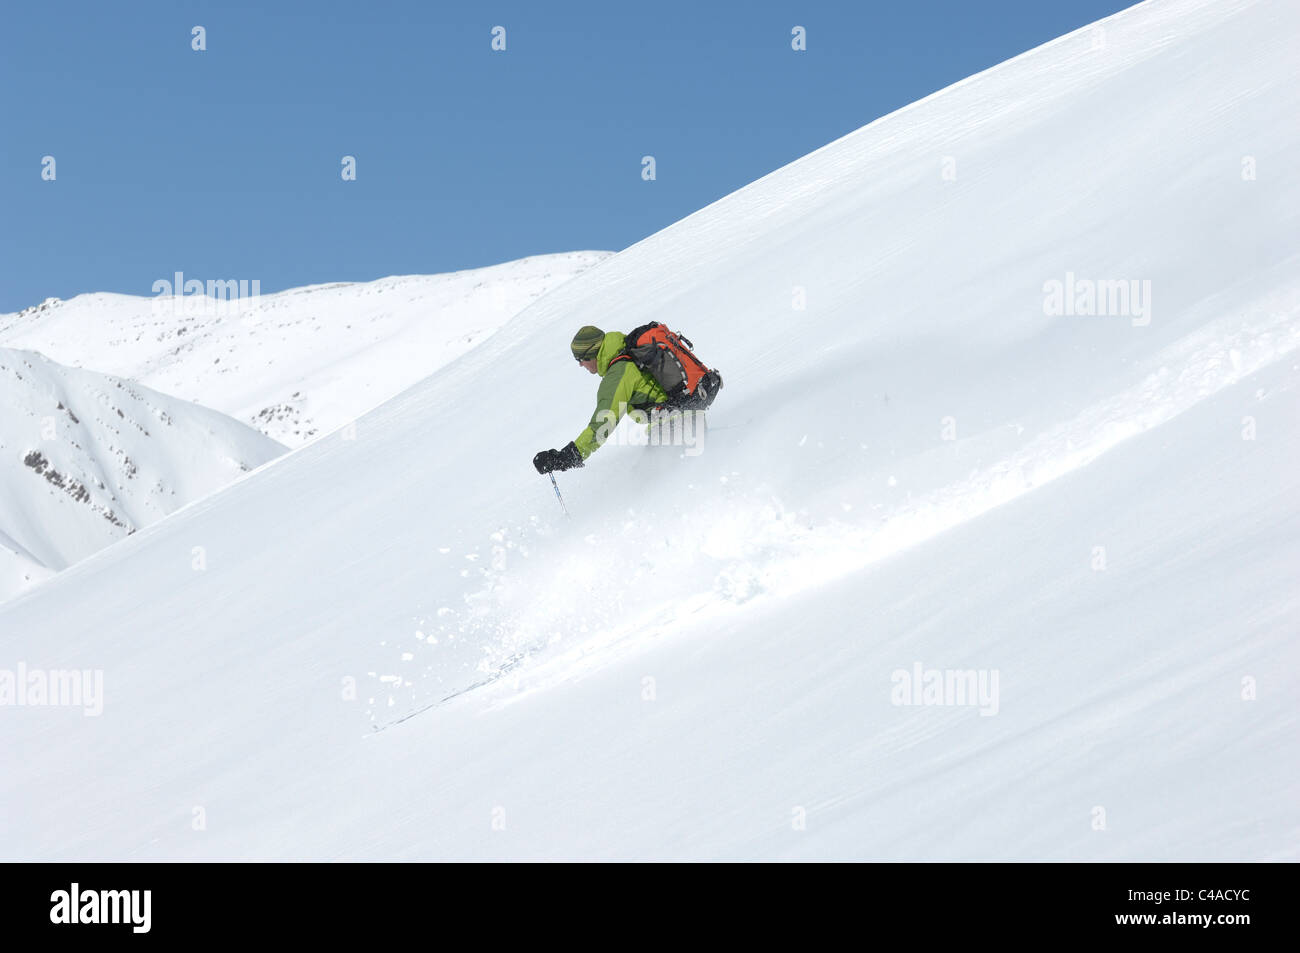 A man skiing wearing a rucksack off piste in fresh snow under a blue sky in Dizin resort part of the Alborz mountains Iran Stock Photo